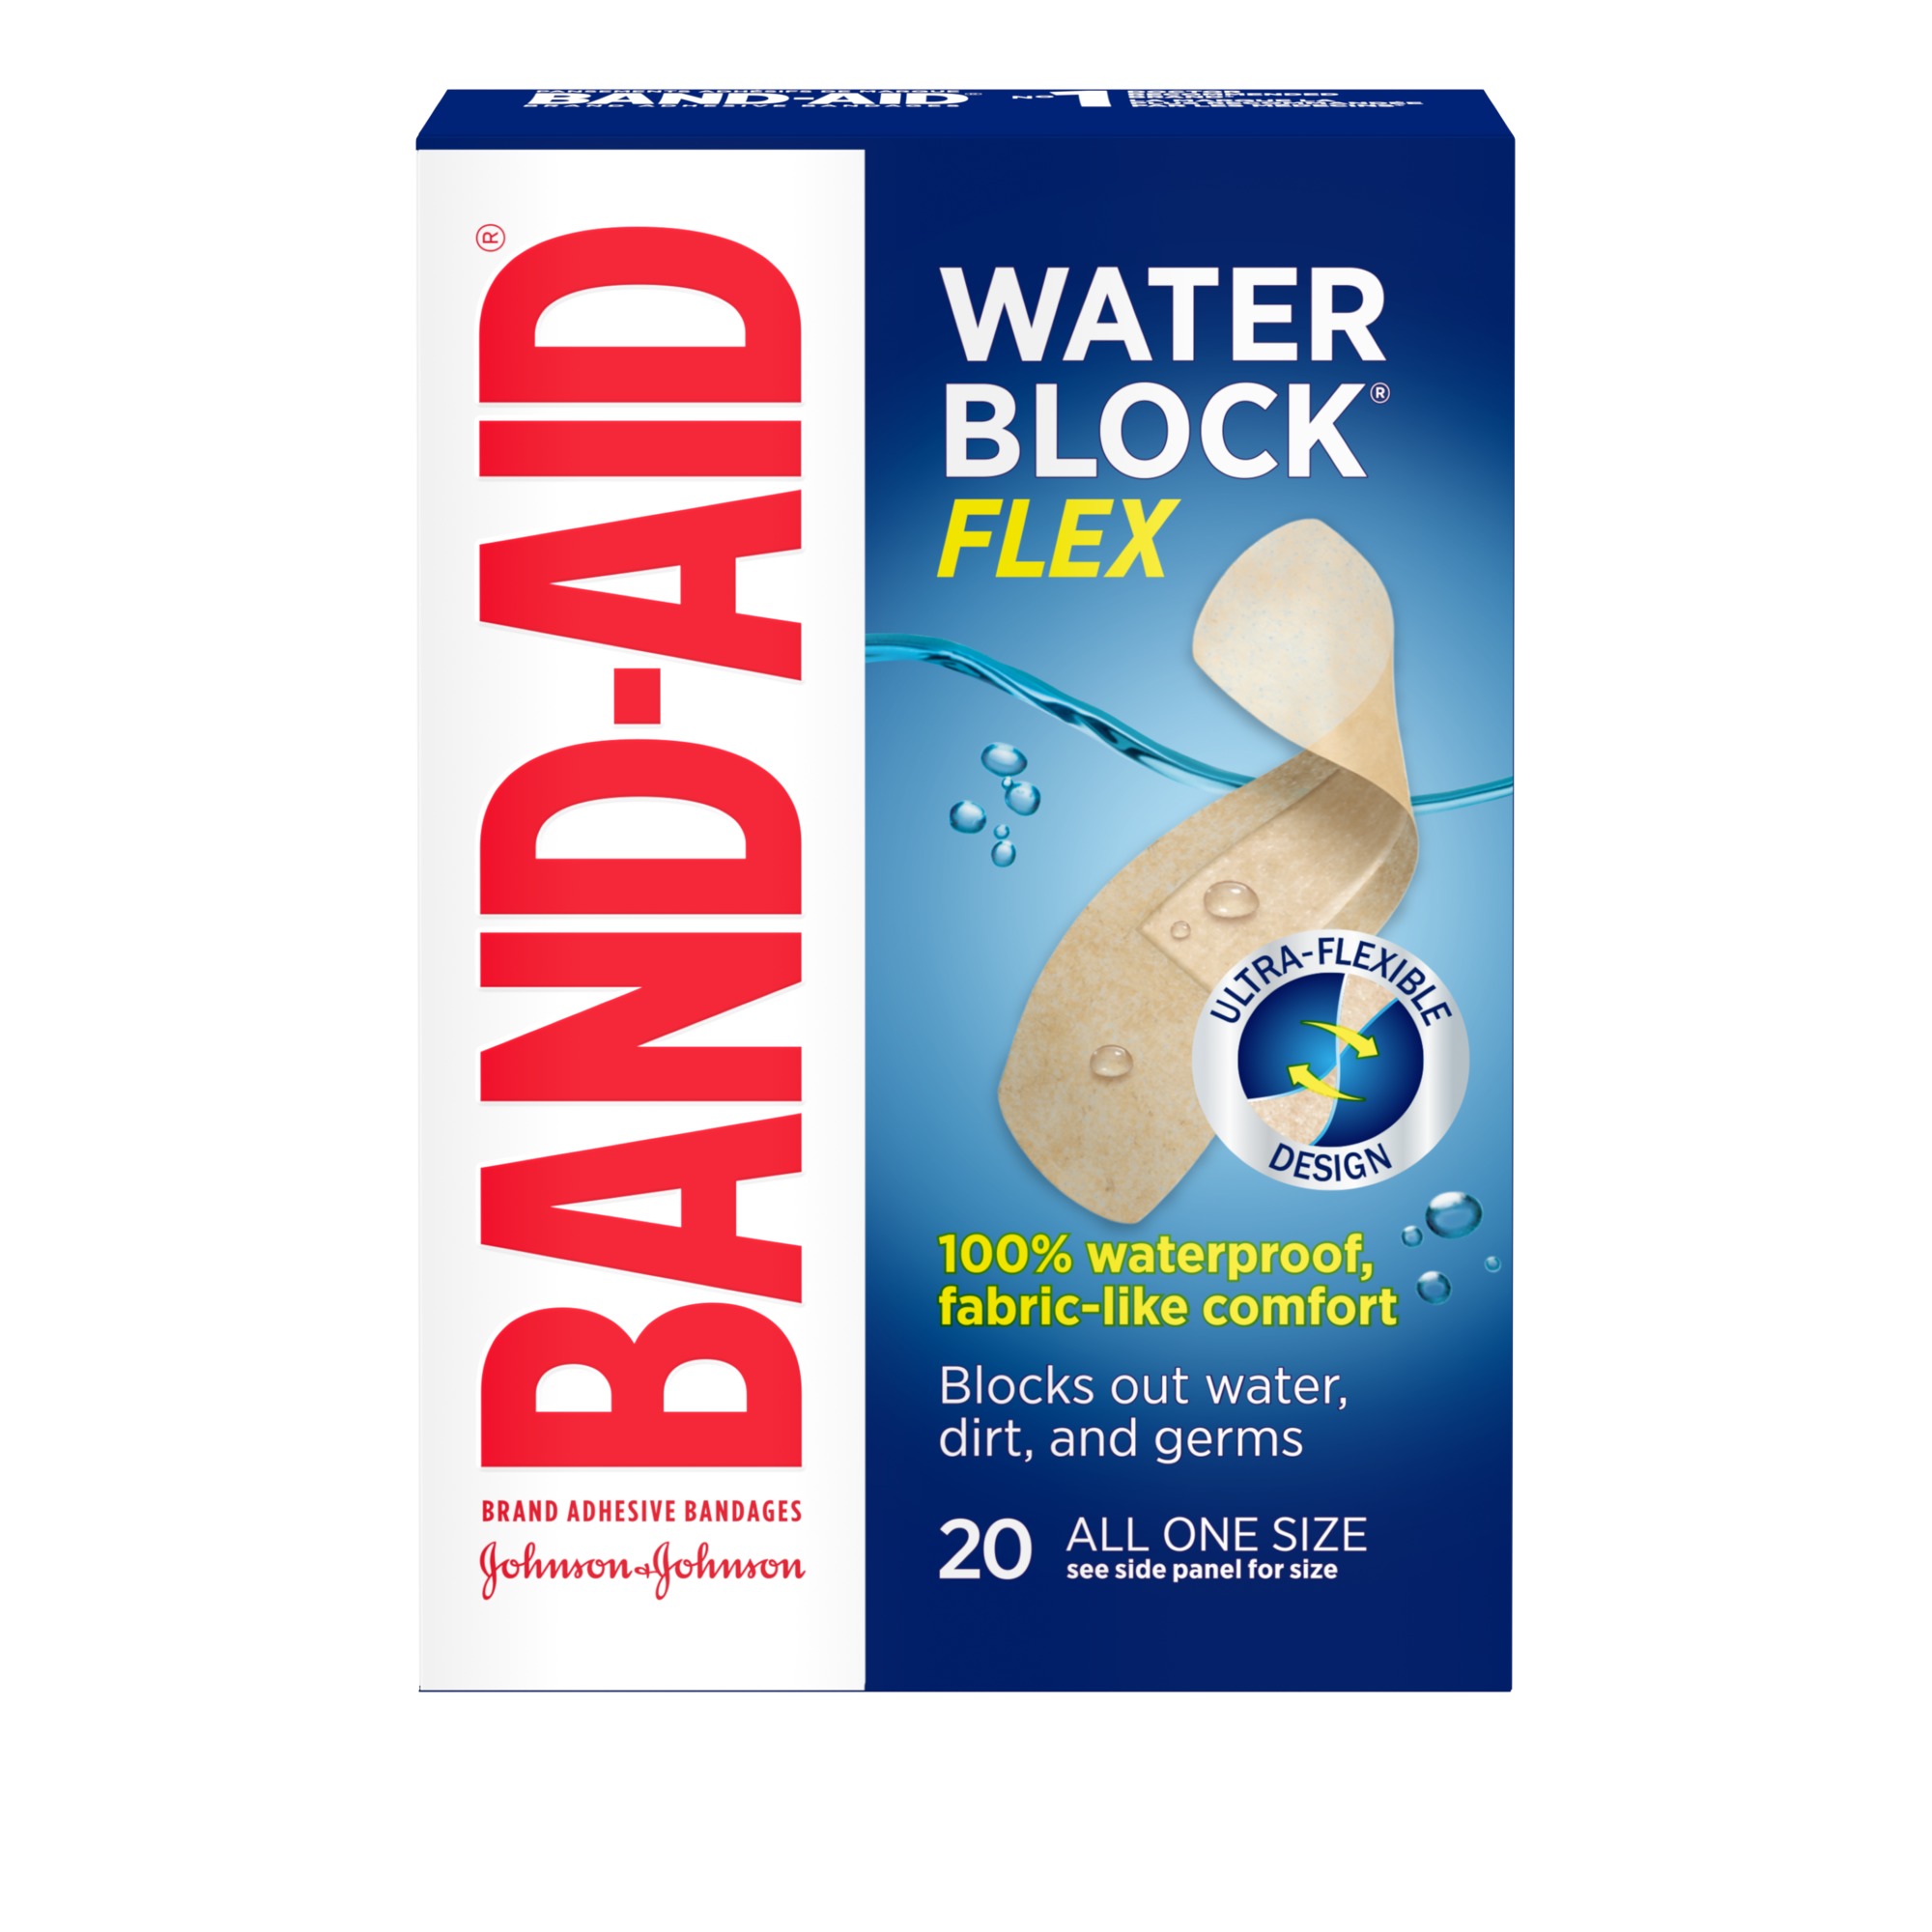 Band-Aid Brand Adhesive Bandages for Cuts and Scrapes, Skin-Flex